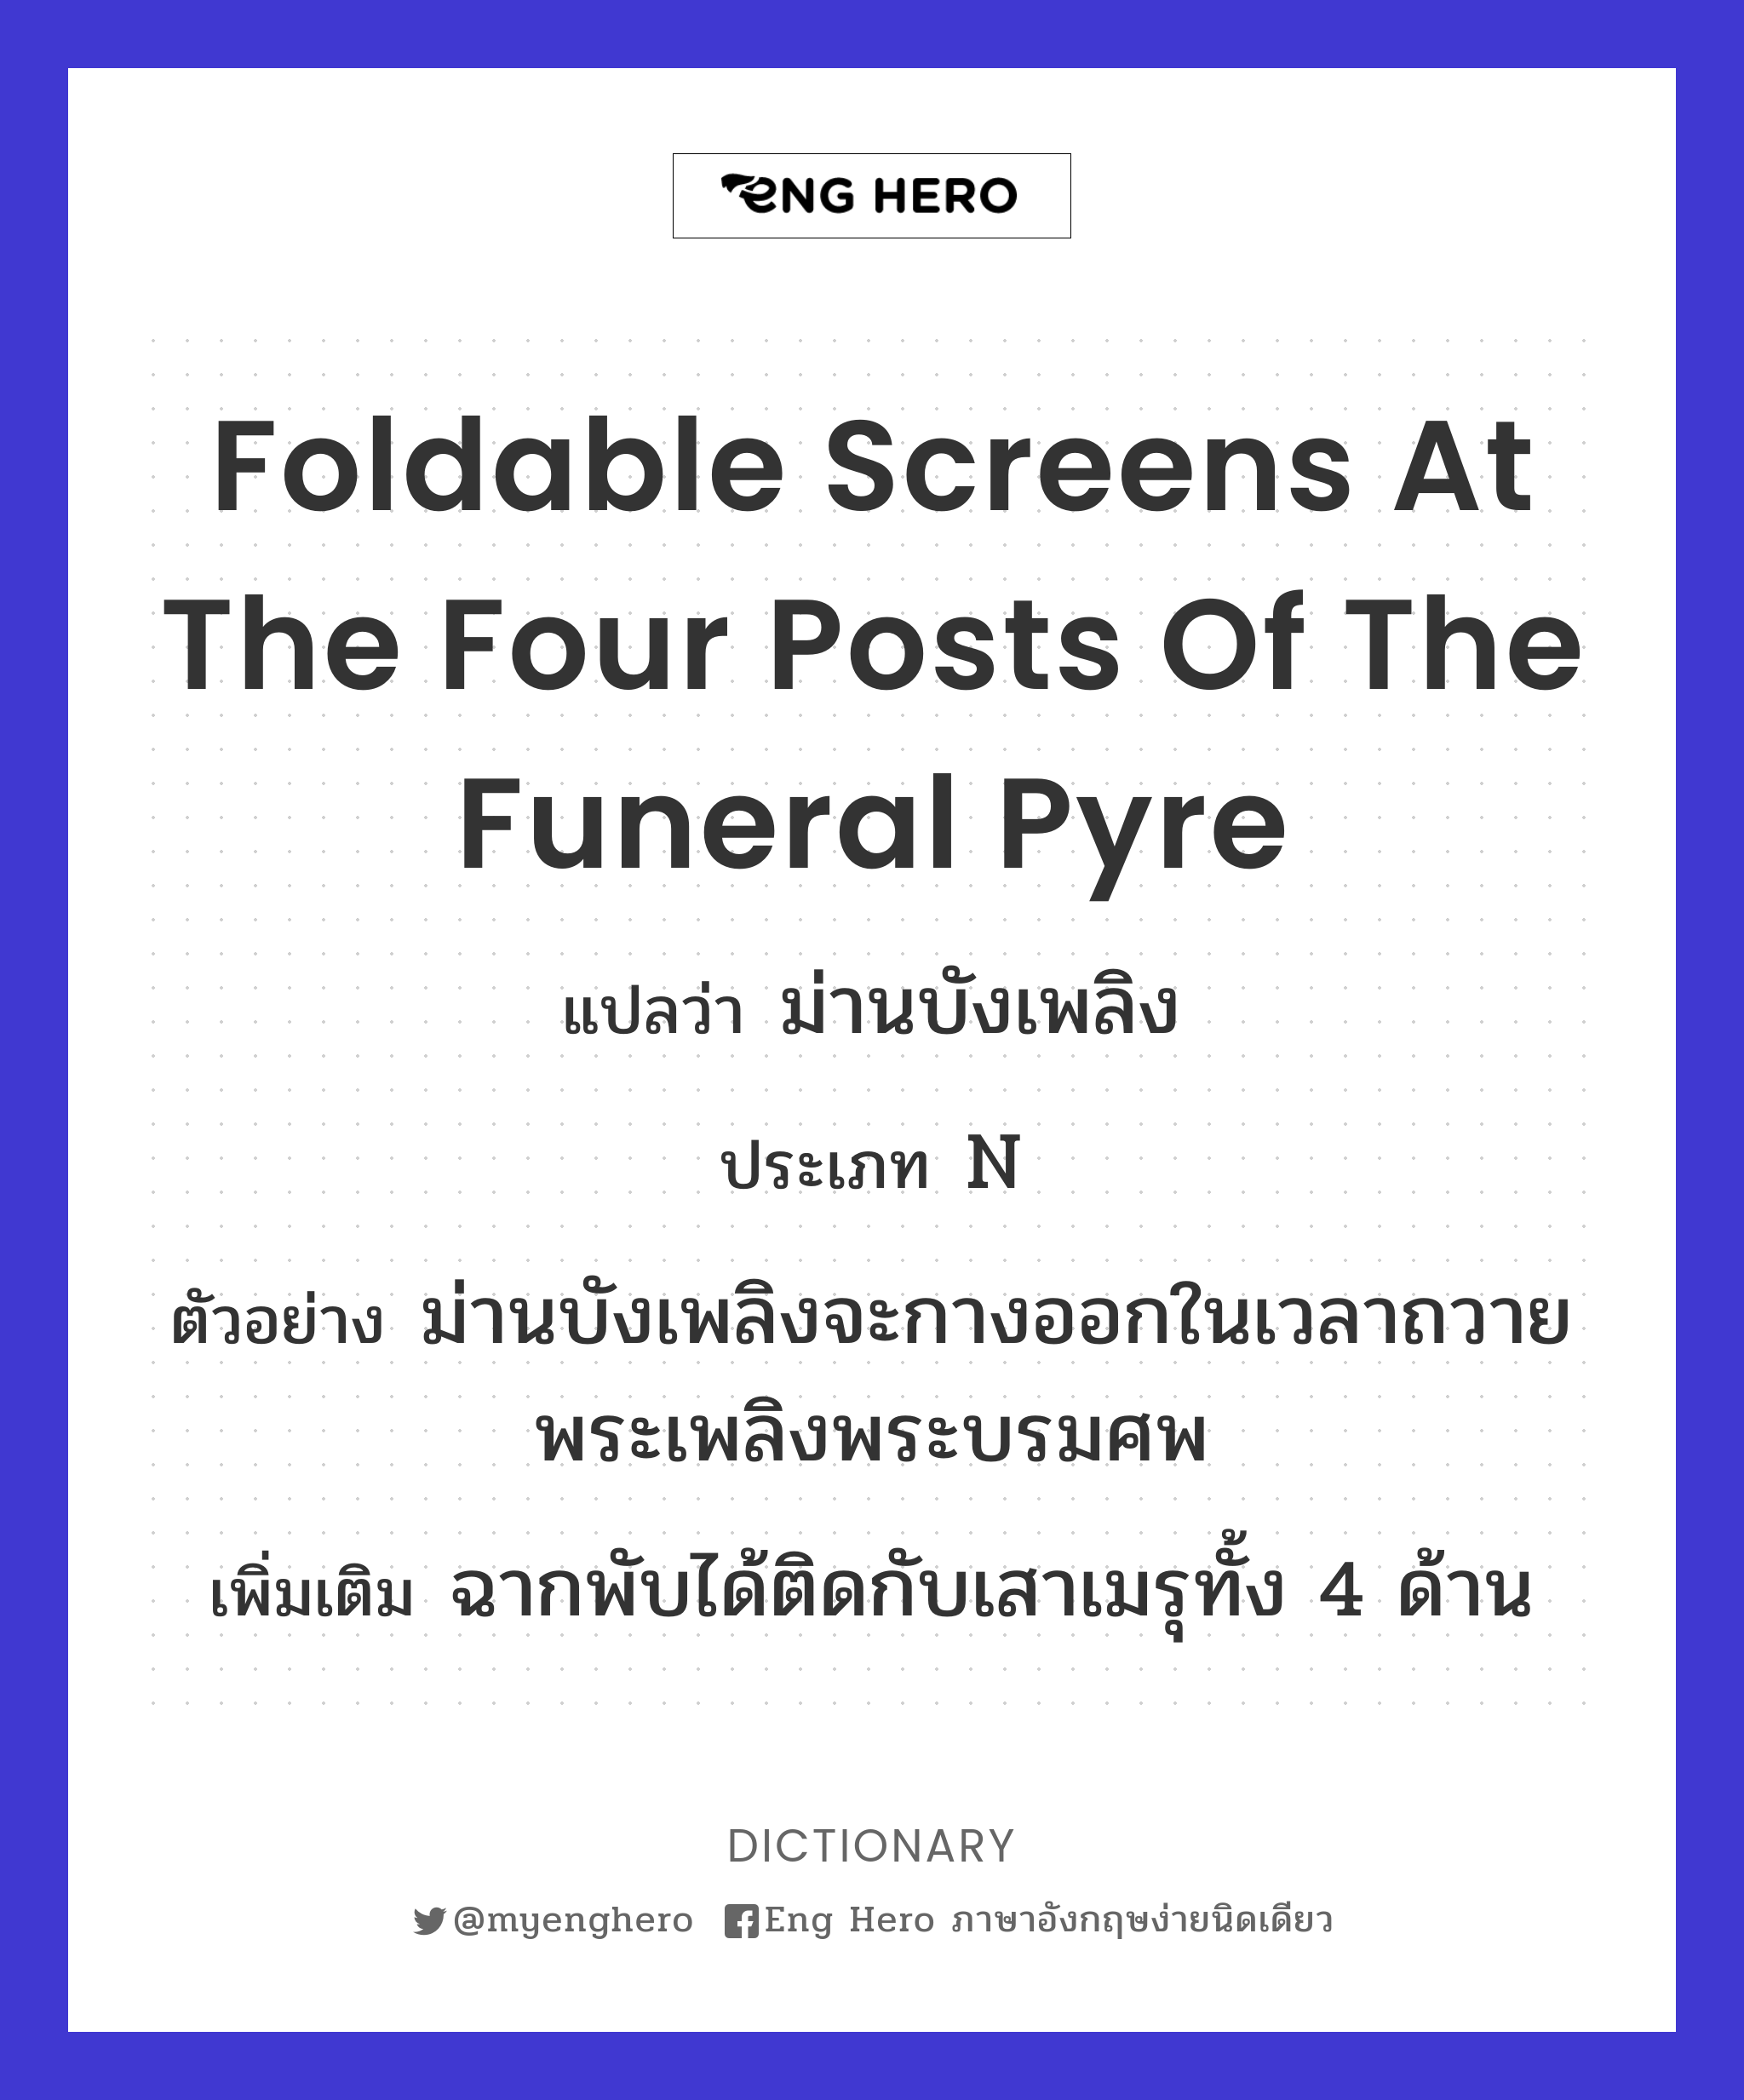 foldable screens at the four posts of the funeral pyre